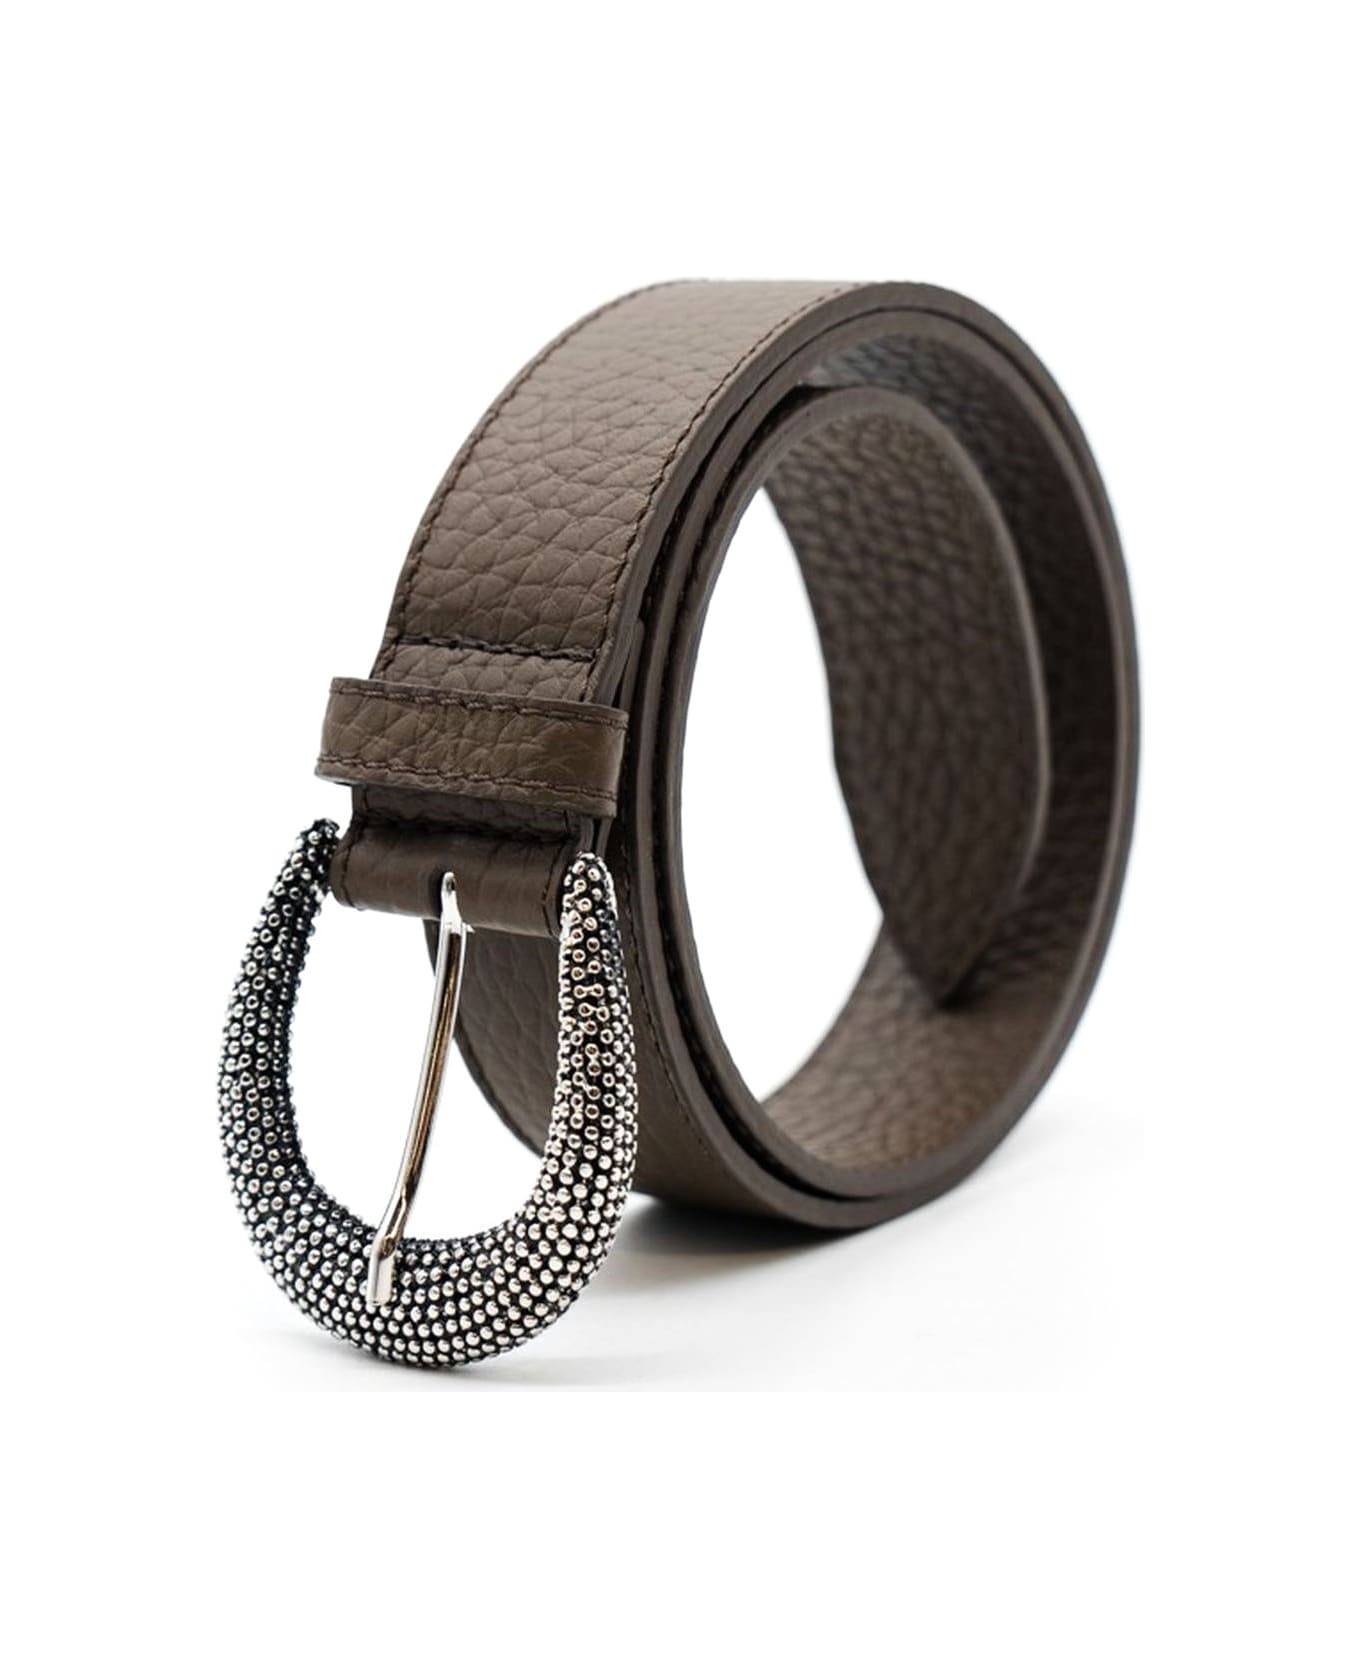 Orciani Brown Soft Leather Belt - Marrone